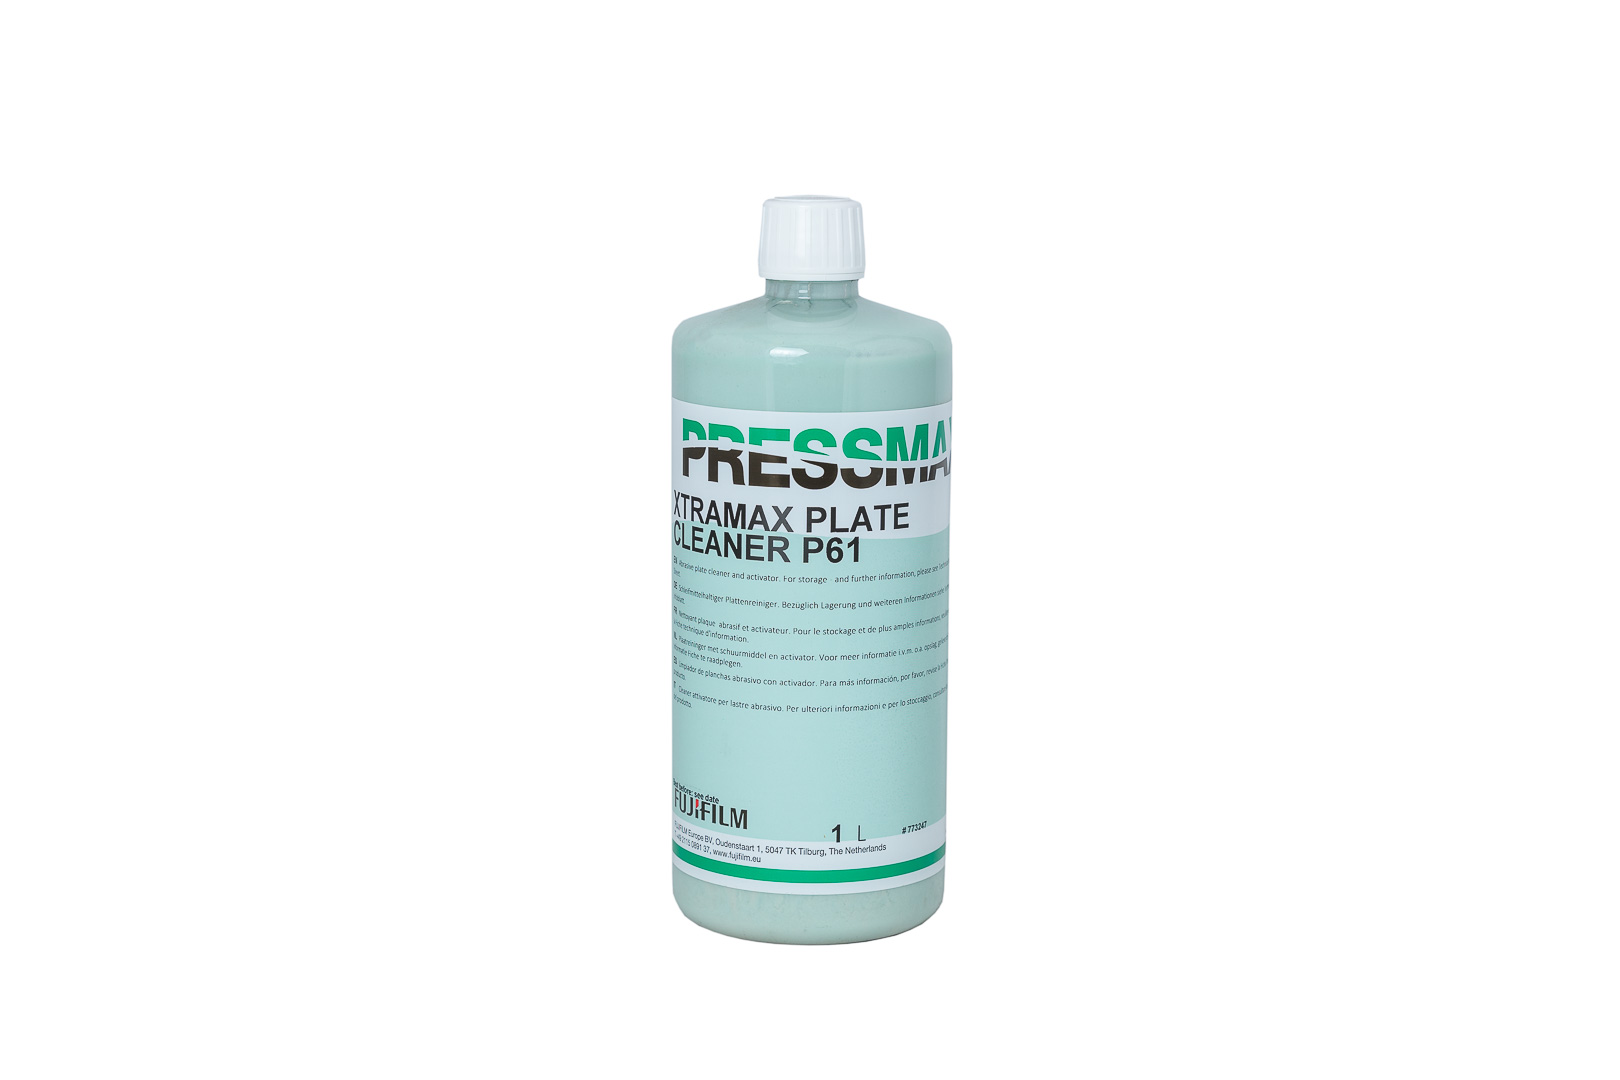 XtraMax Plate Cleaner P61  1 Liter